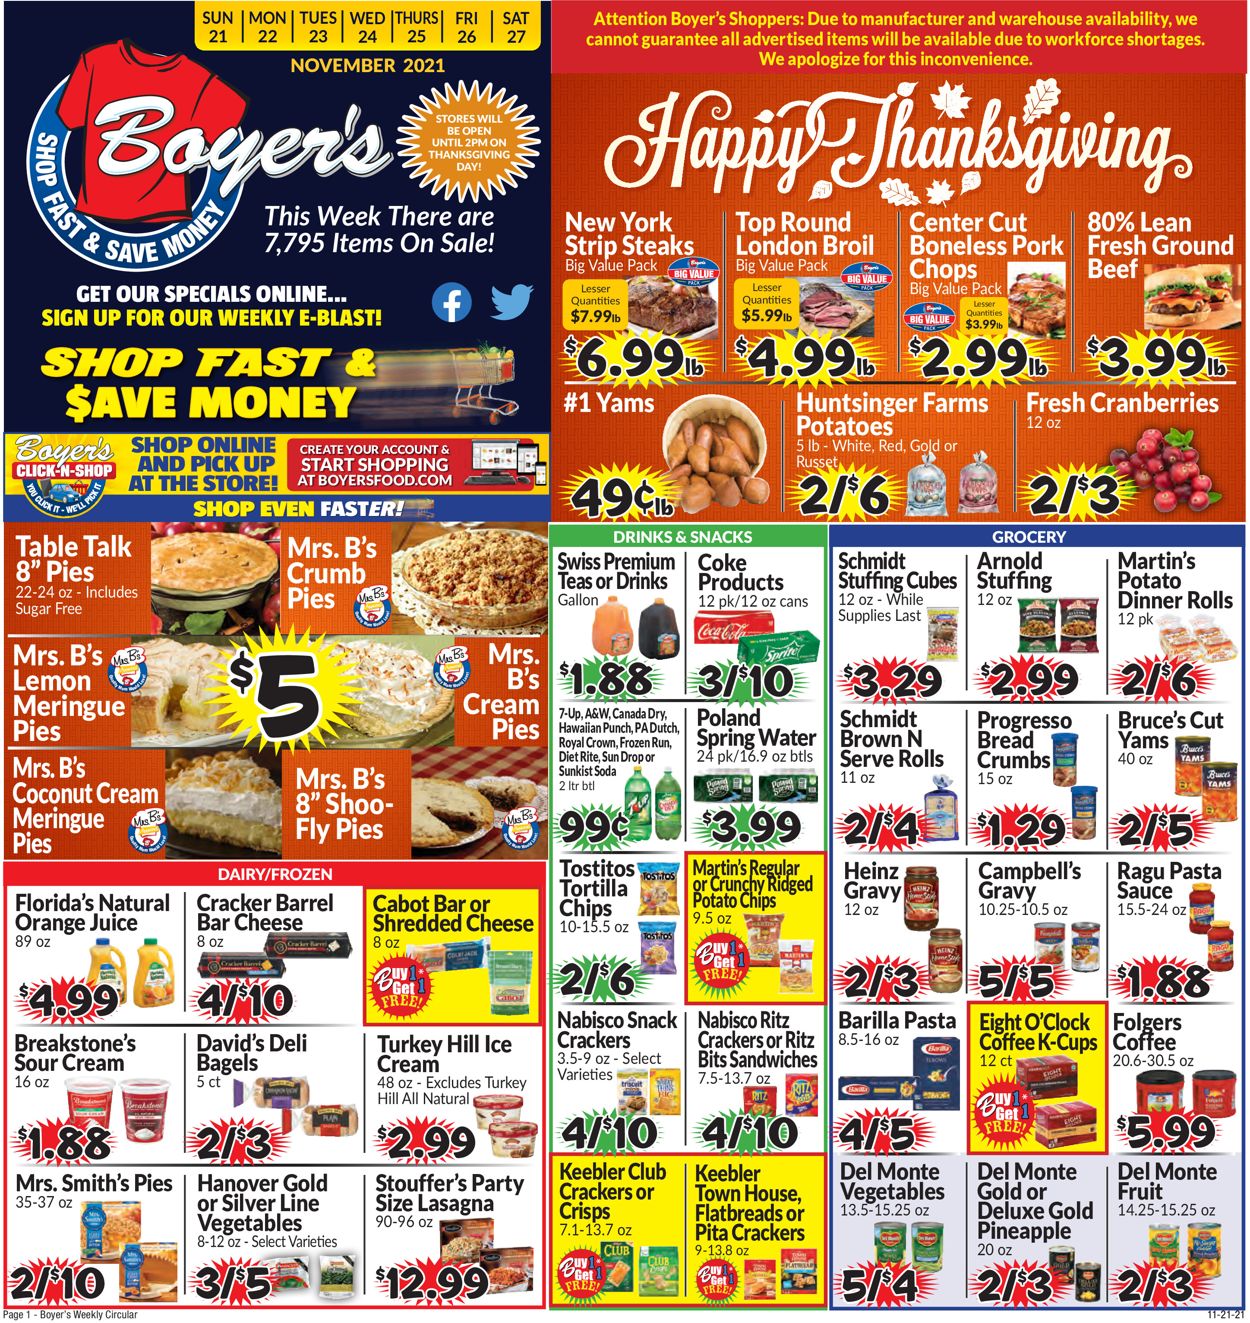 Boyer's Food Markets THANKSGIVING 2021 Weekly Ad Circular - valid 11/21-11/27/2021 (Page 3)